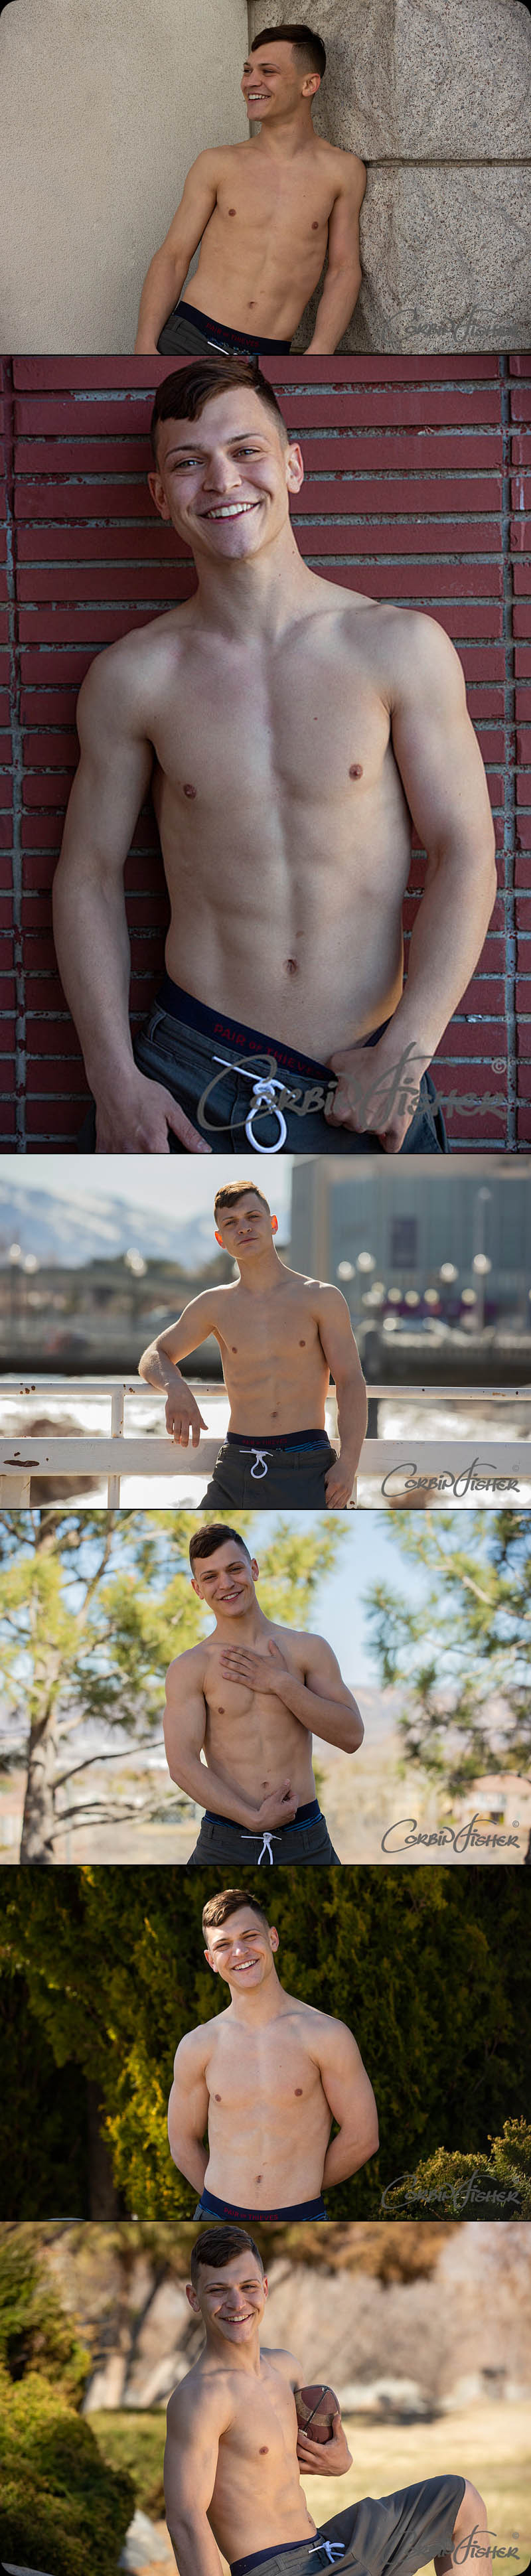 Jake Reddy's Solo at CorbinFisher